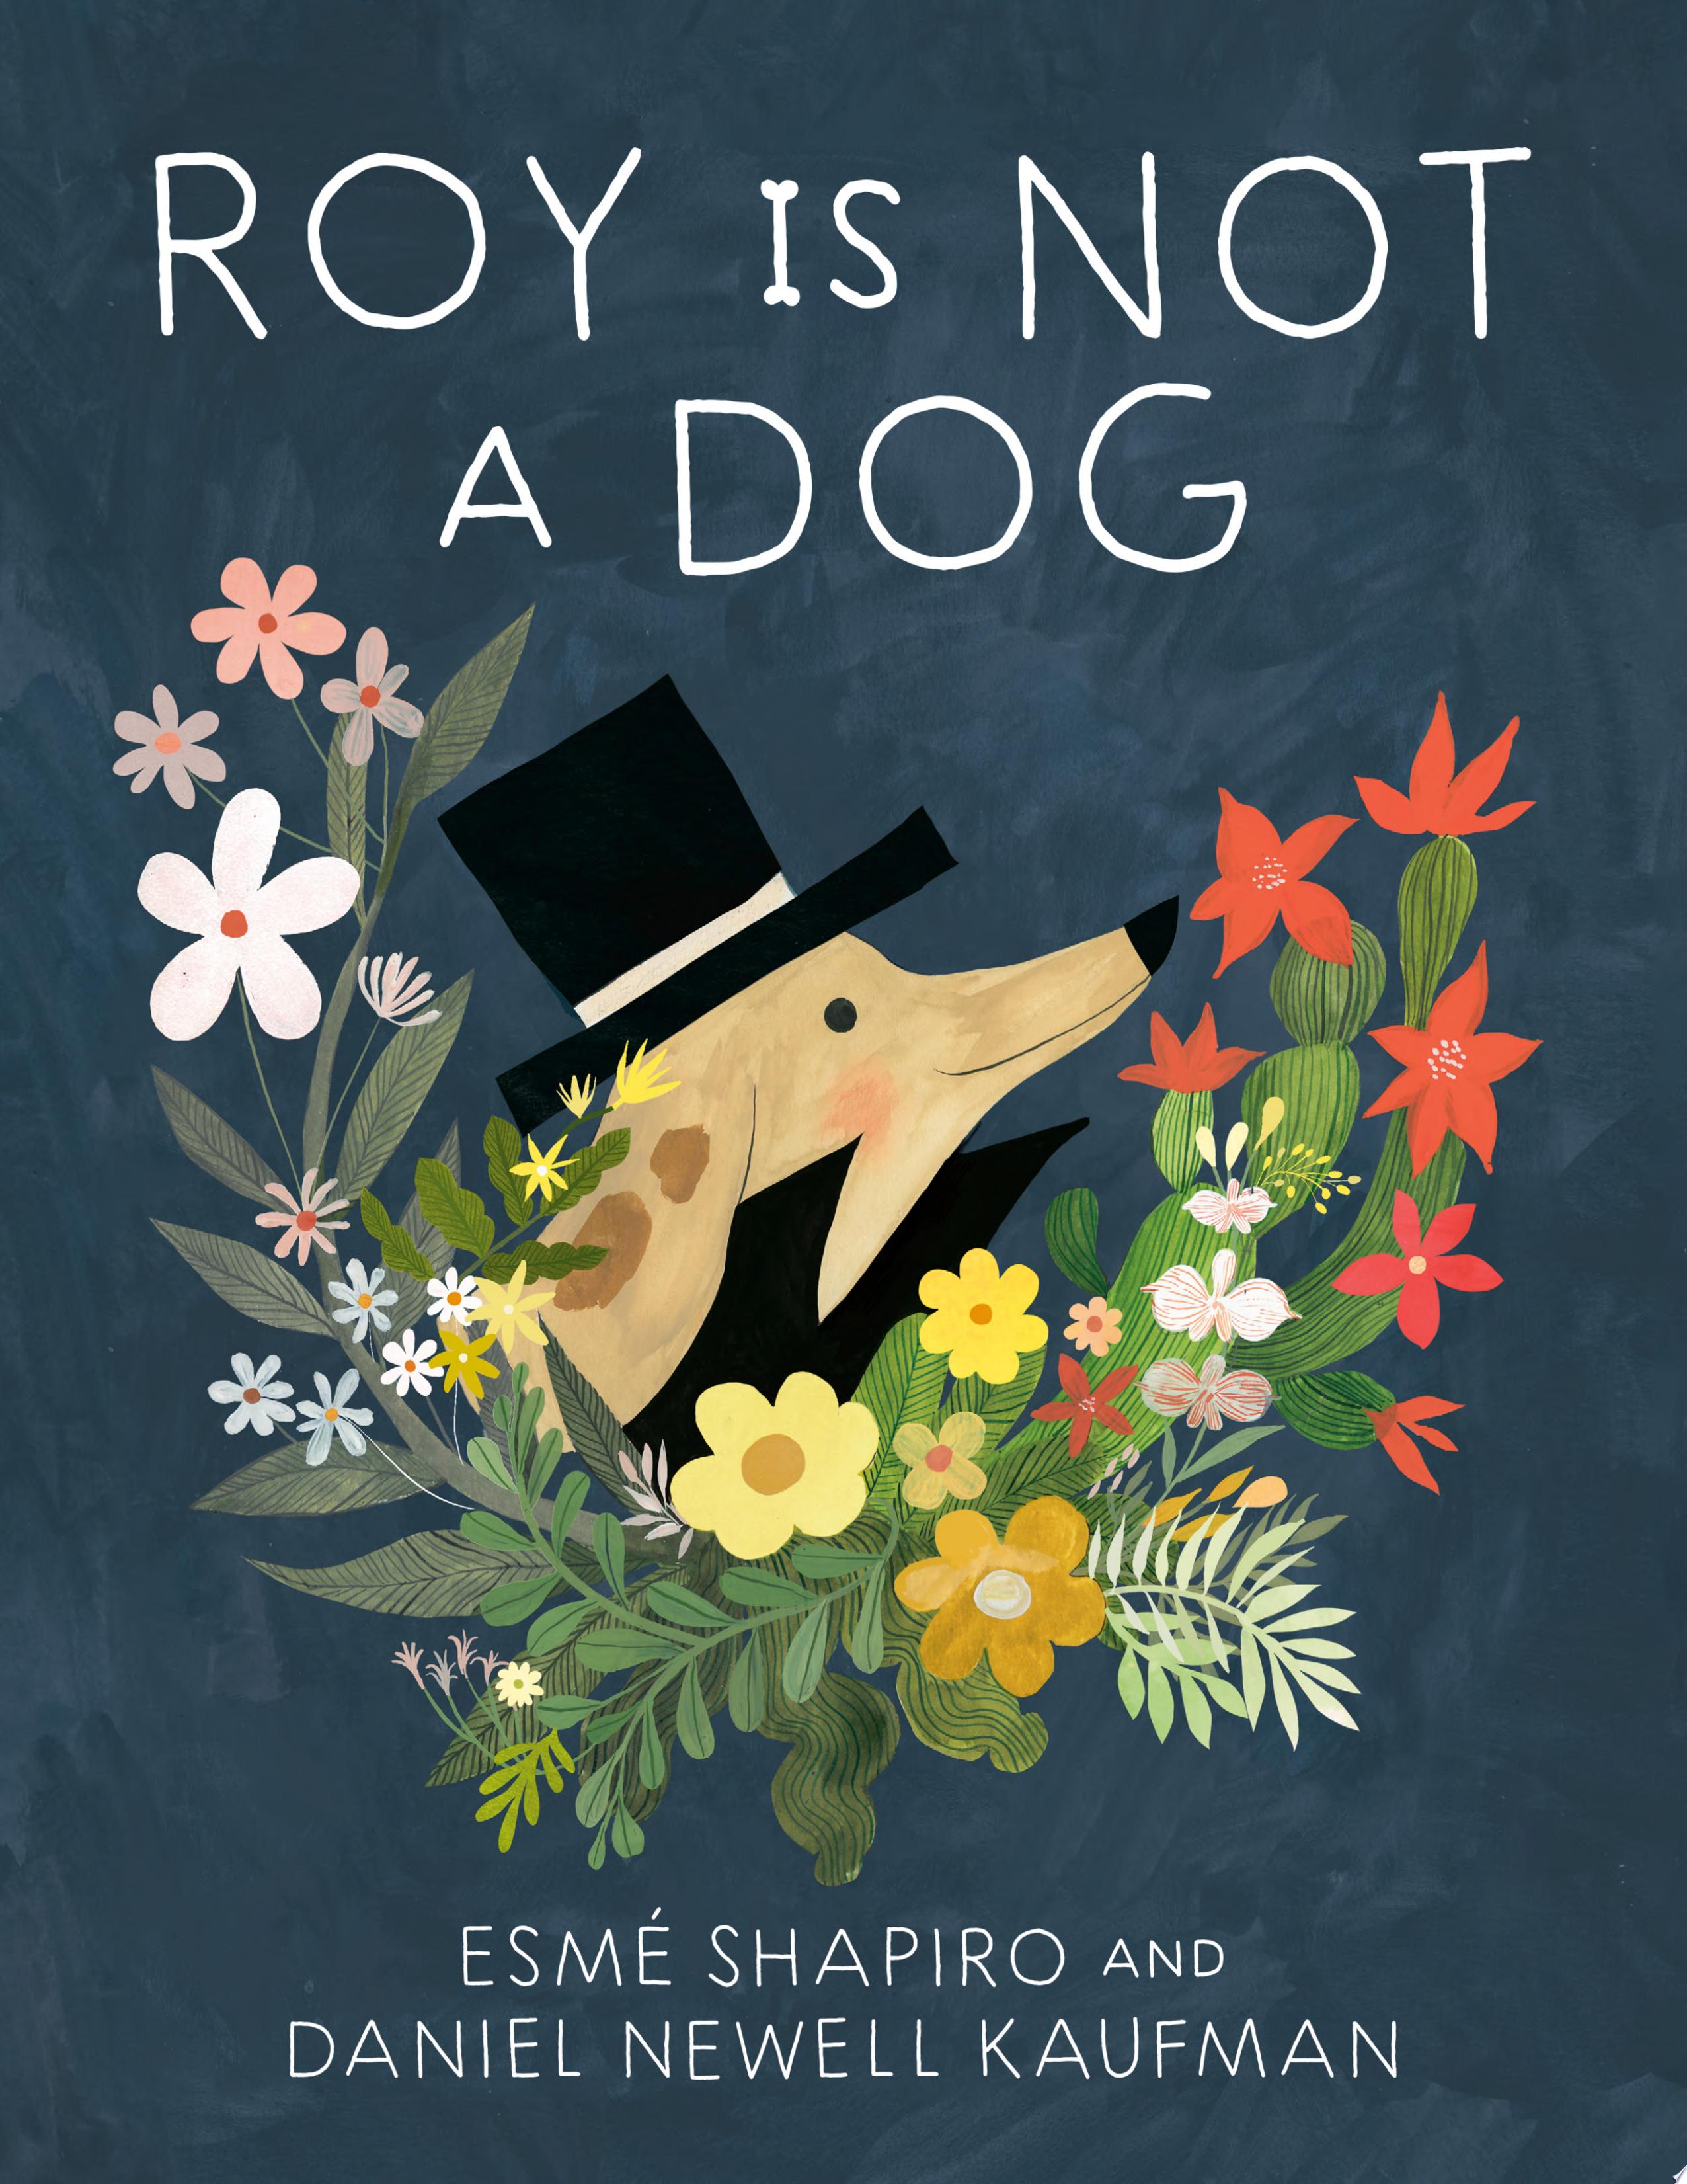 Image for "Roy Is Not a Dog"